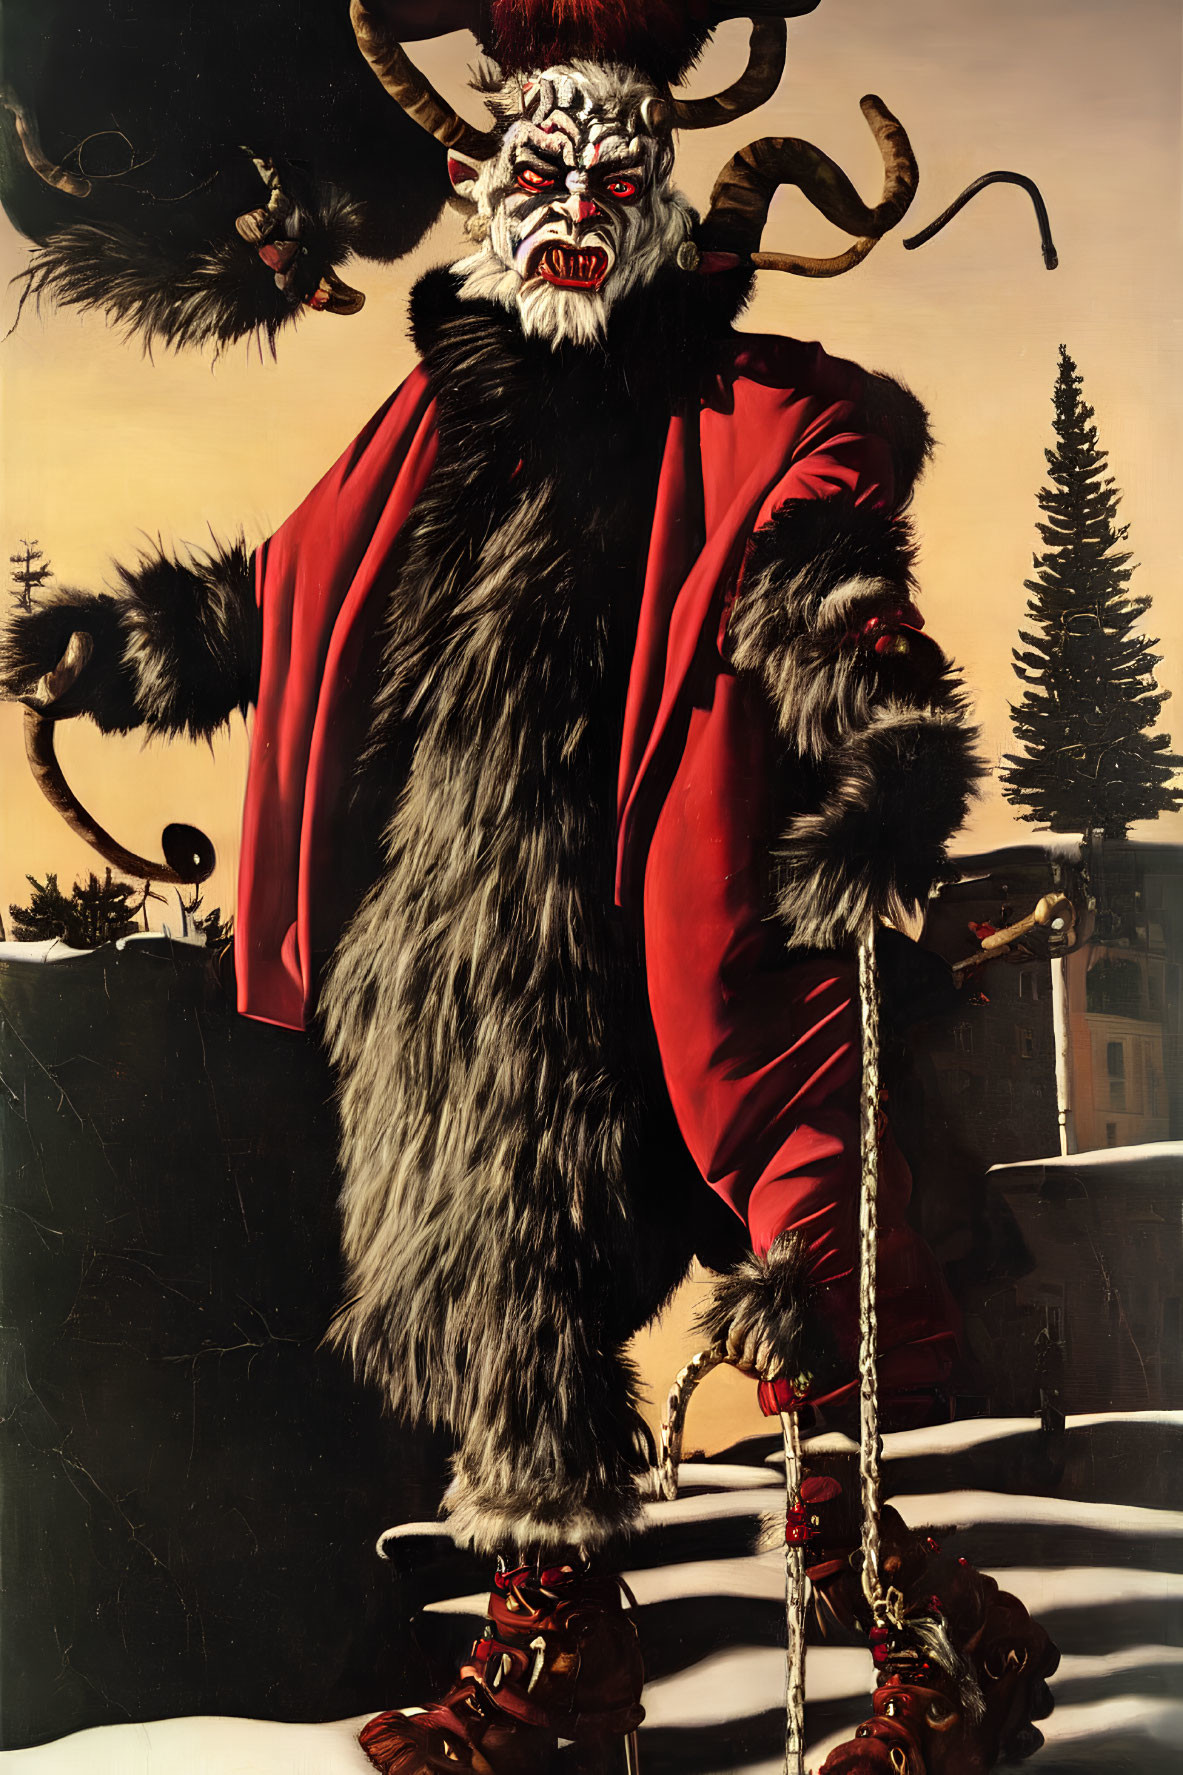 Sinister figure in red and black costume with horned mask and staff on snowy ground